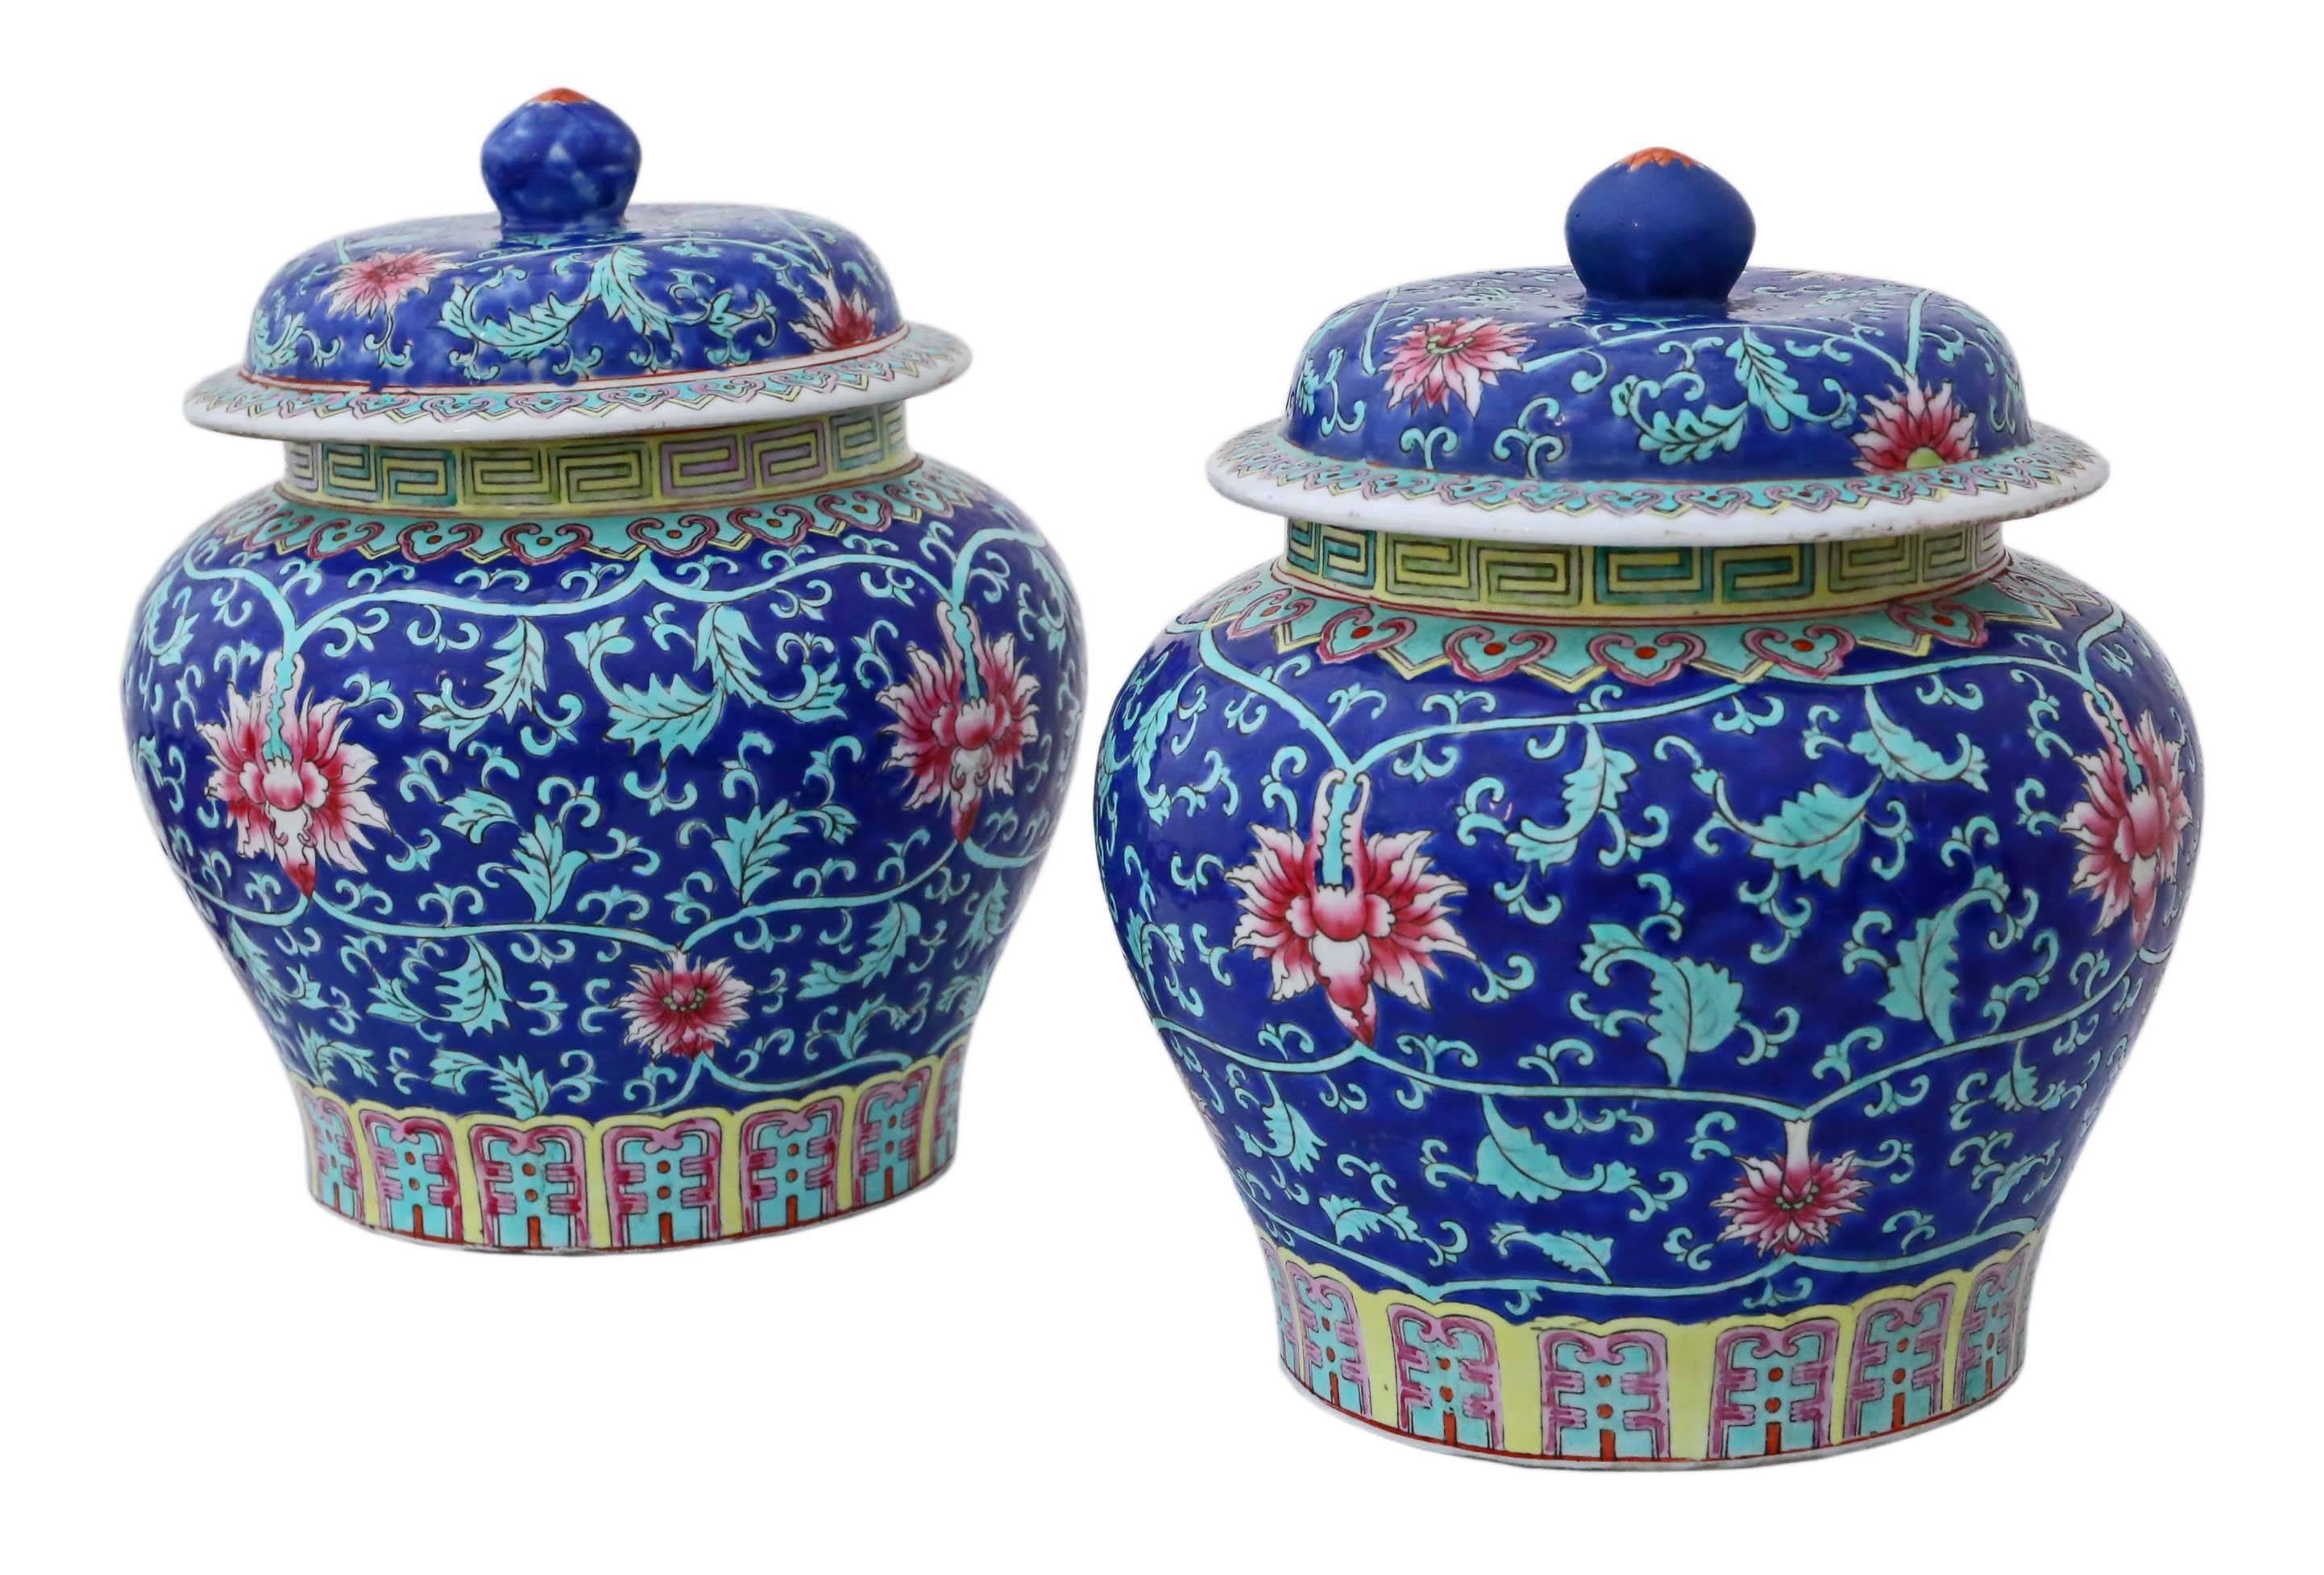 Antique large pair of Chinese Republic period (circa 1912-1949) jars with lids.

These are lovely large quality pieces, a touch of class. A charming and rare pair of jars.

Would look amazing in the right location, large enough to make a real